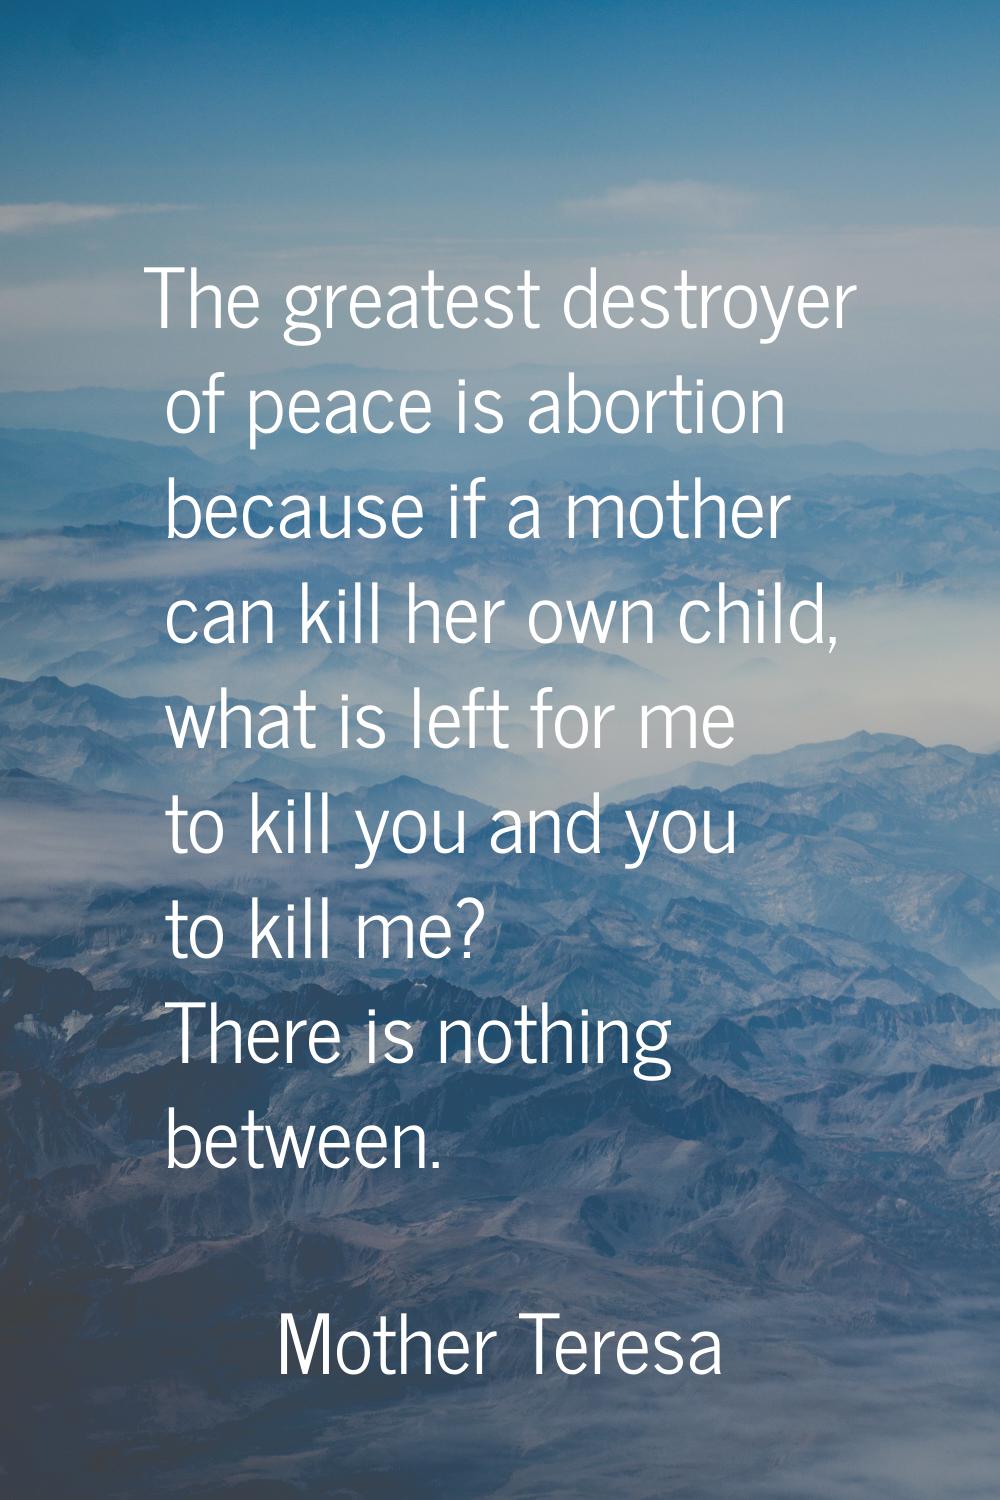 The greatest destroyer of peace is abortion because if a mother can kill her own child, what is lef